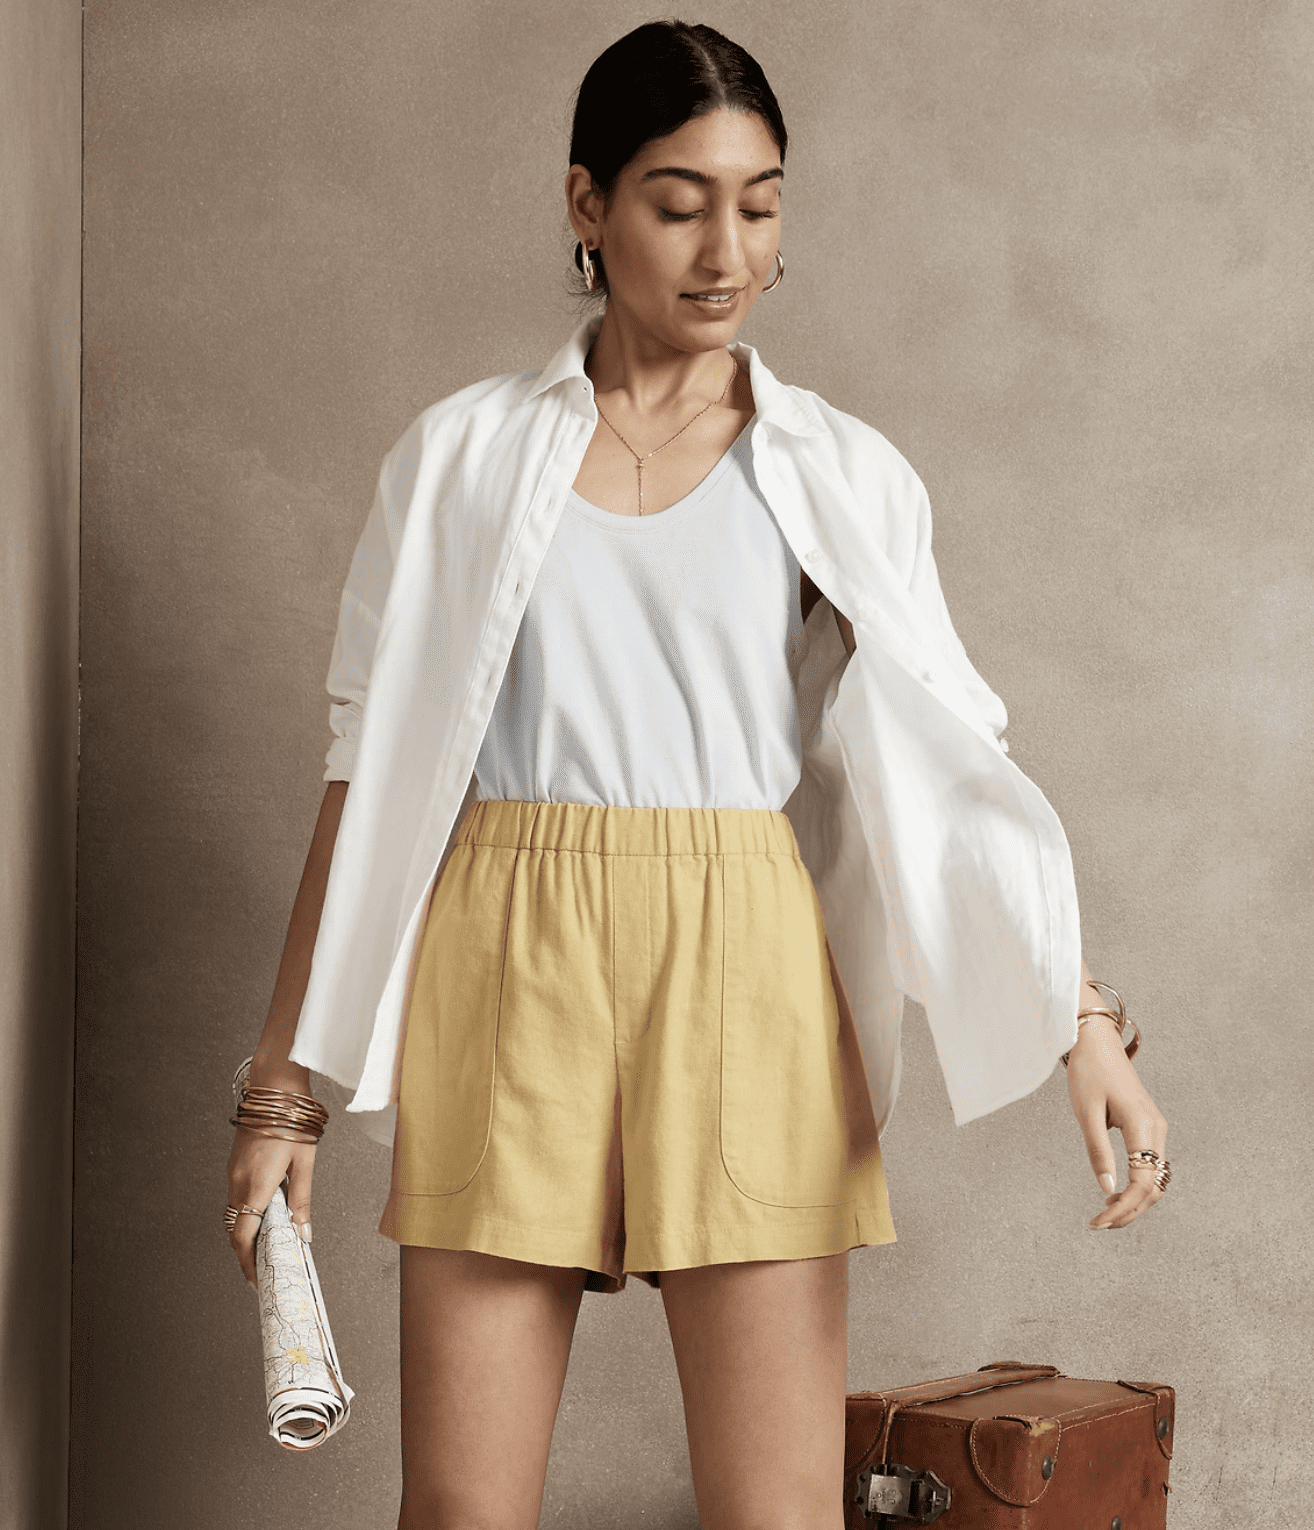 Best Shorts for Women: 7 Pairs Our Team Loves | Wit & Delight